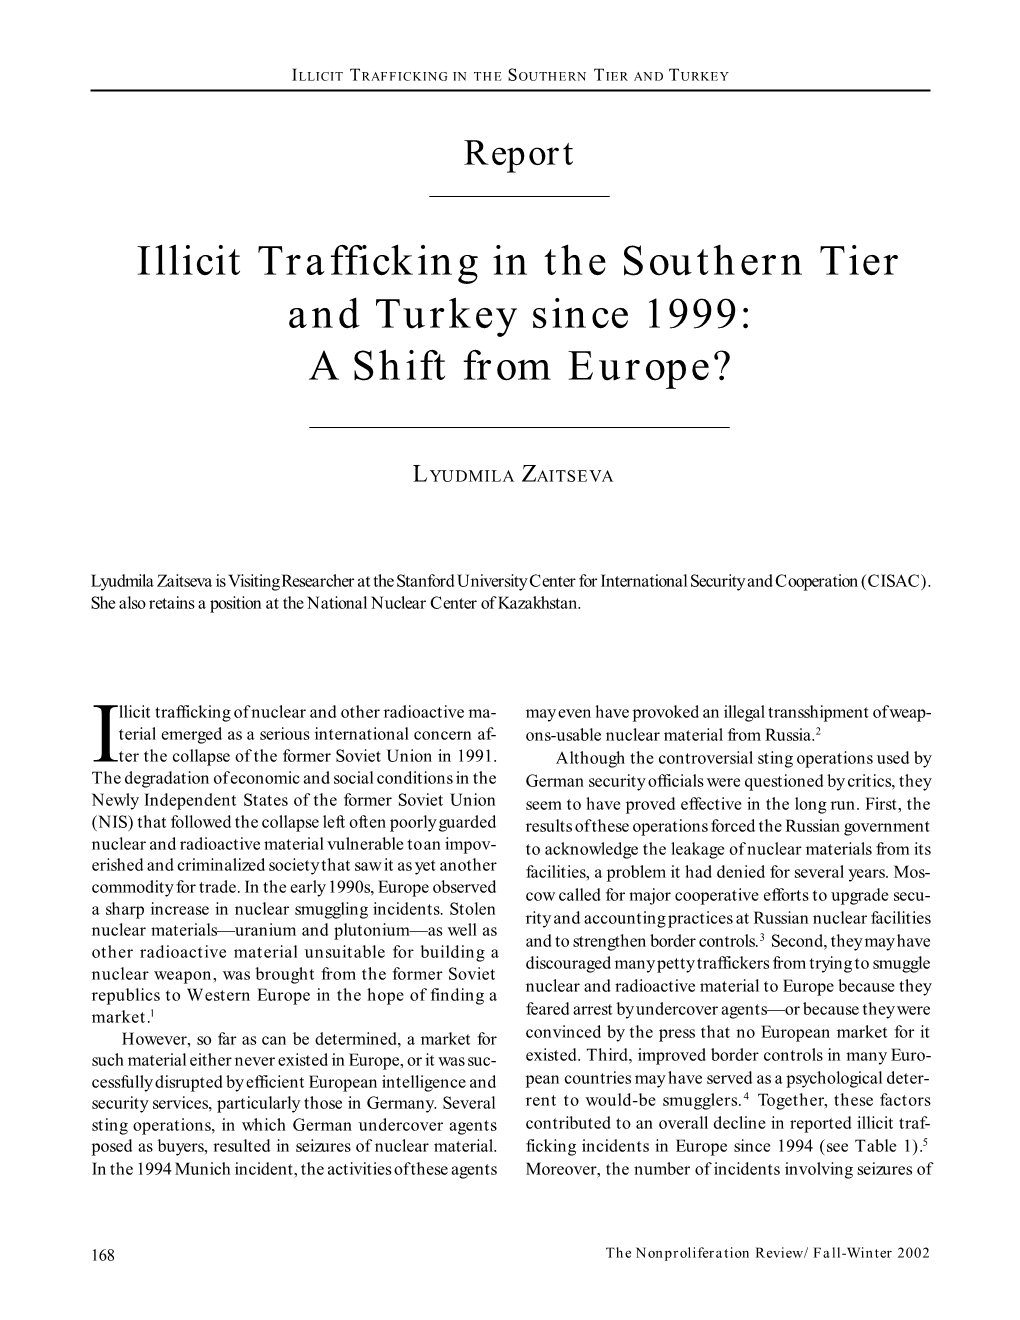 NPR 9.3: Illicit Trafficking in the Southern Tier and Turkey Since 1999